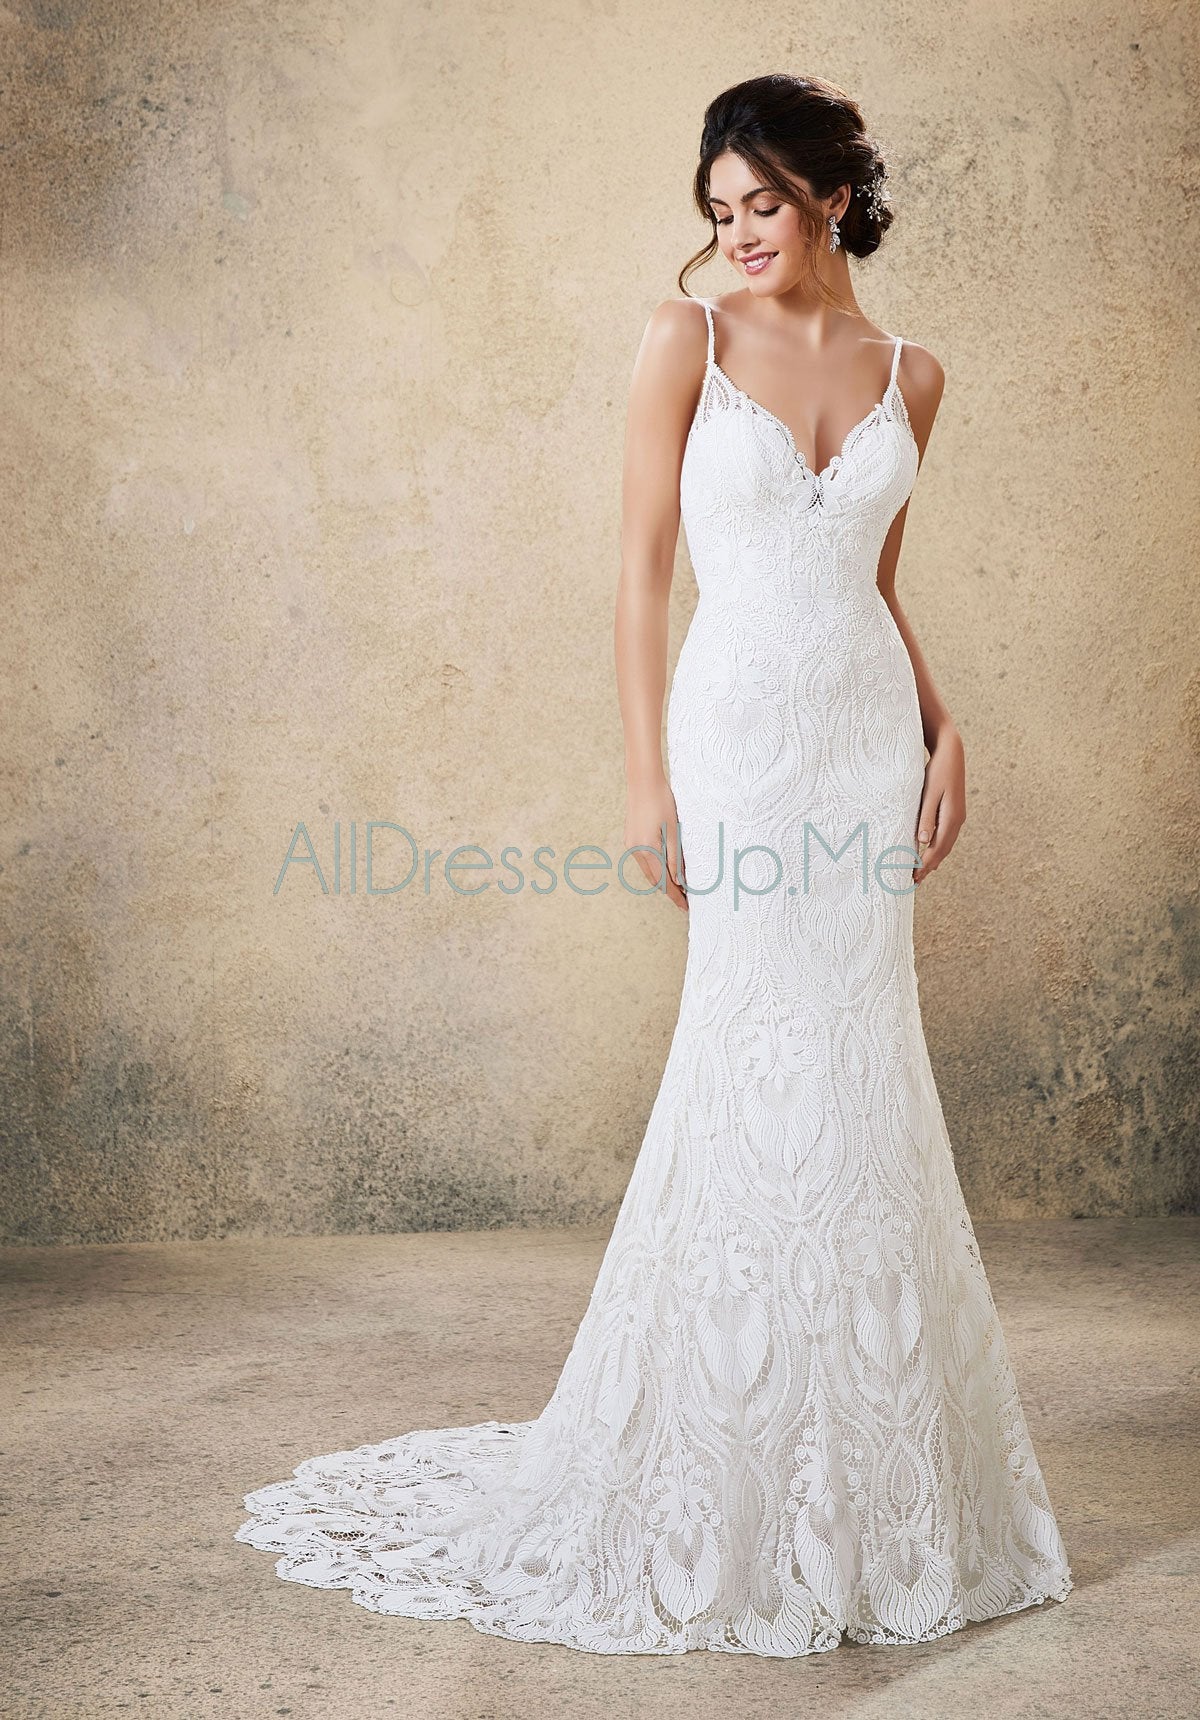 Blu - Riley - 5775 - Cheron's Bridal, Wedding Gown - Morilee Blu - - Wedding Gowns Dresses Chattanooga Hixson Shops Boutiques Tennessee TN Georgia GA MSRP Lowest Prices Sale Discount